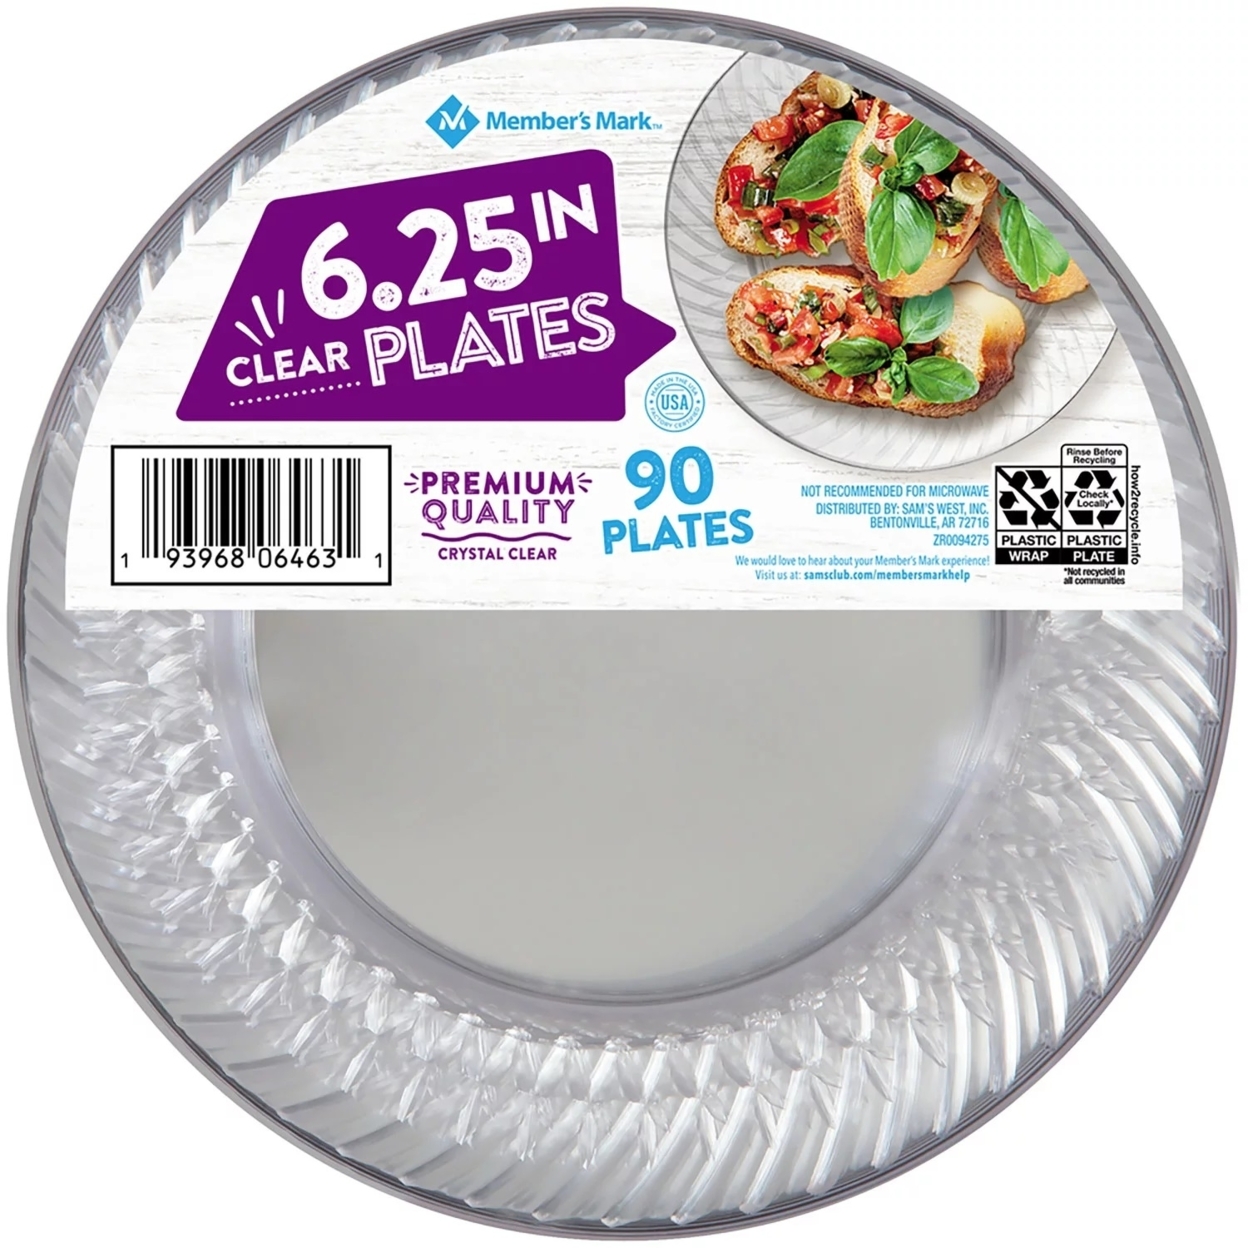 Member's Mark Clear Plastic Plates, 6.25 (90 Count)